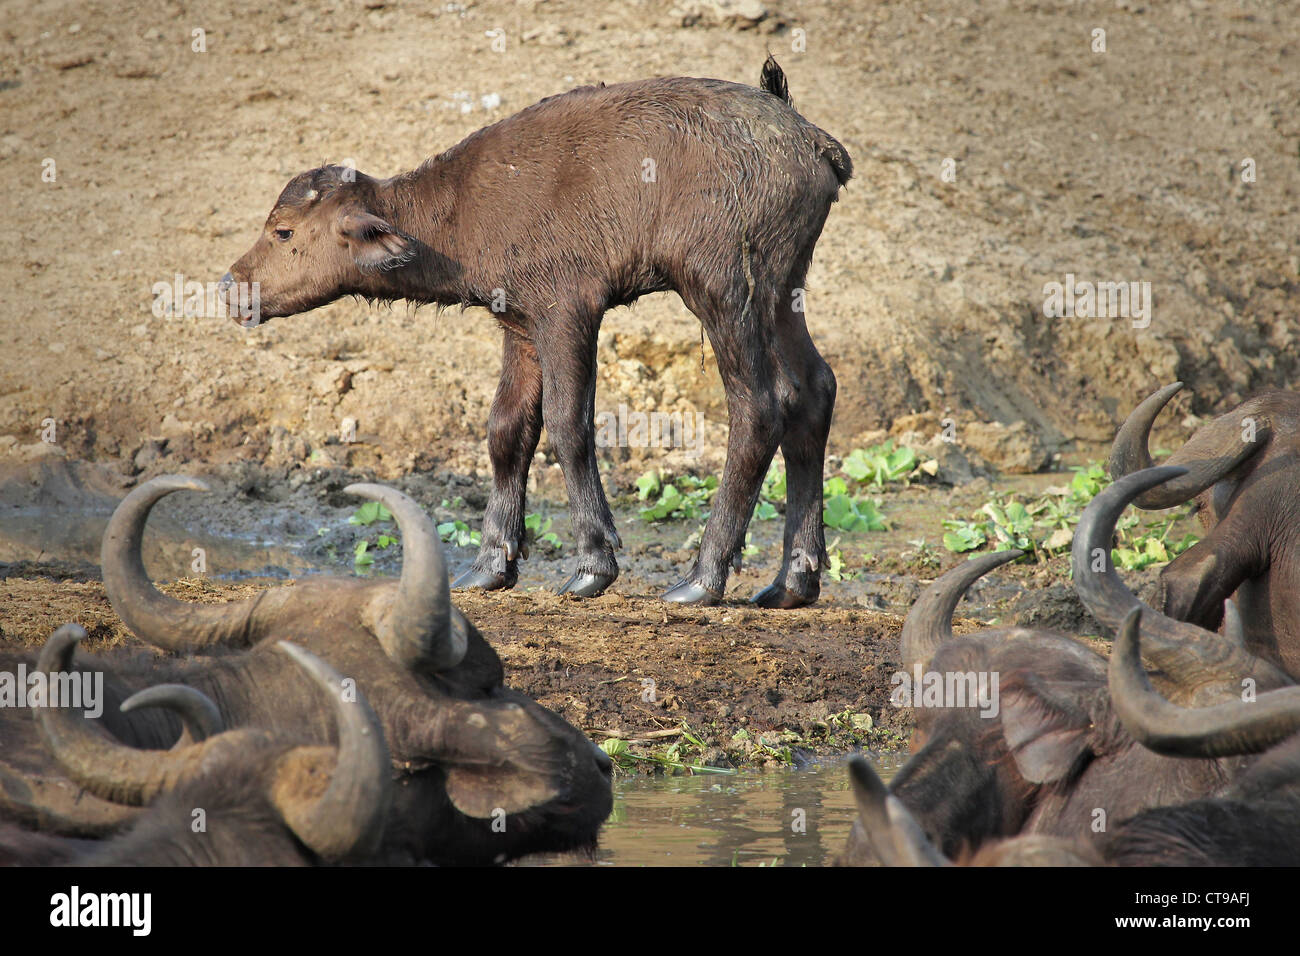 A Cute Newborn Baby African Buffalo stands for the first time on the shores of the Kazinga Channel in Uganda, Africa. Stock Photo